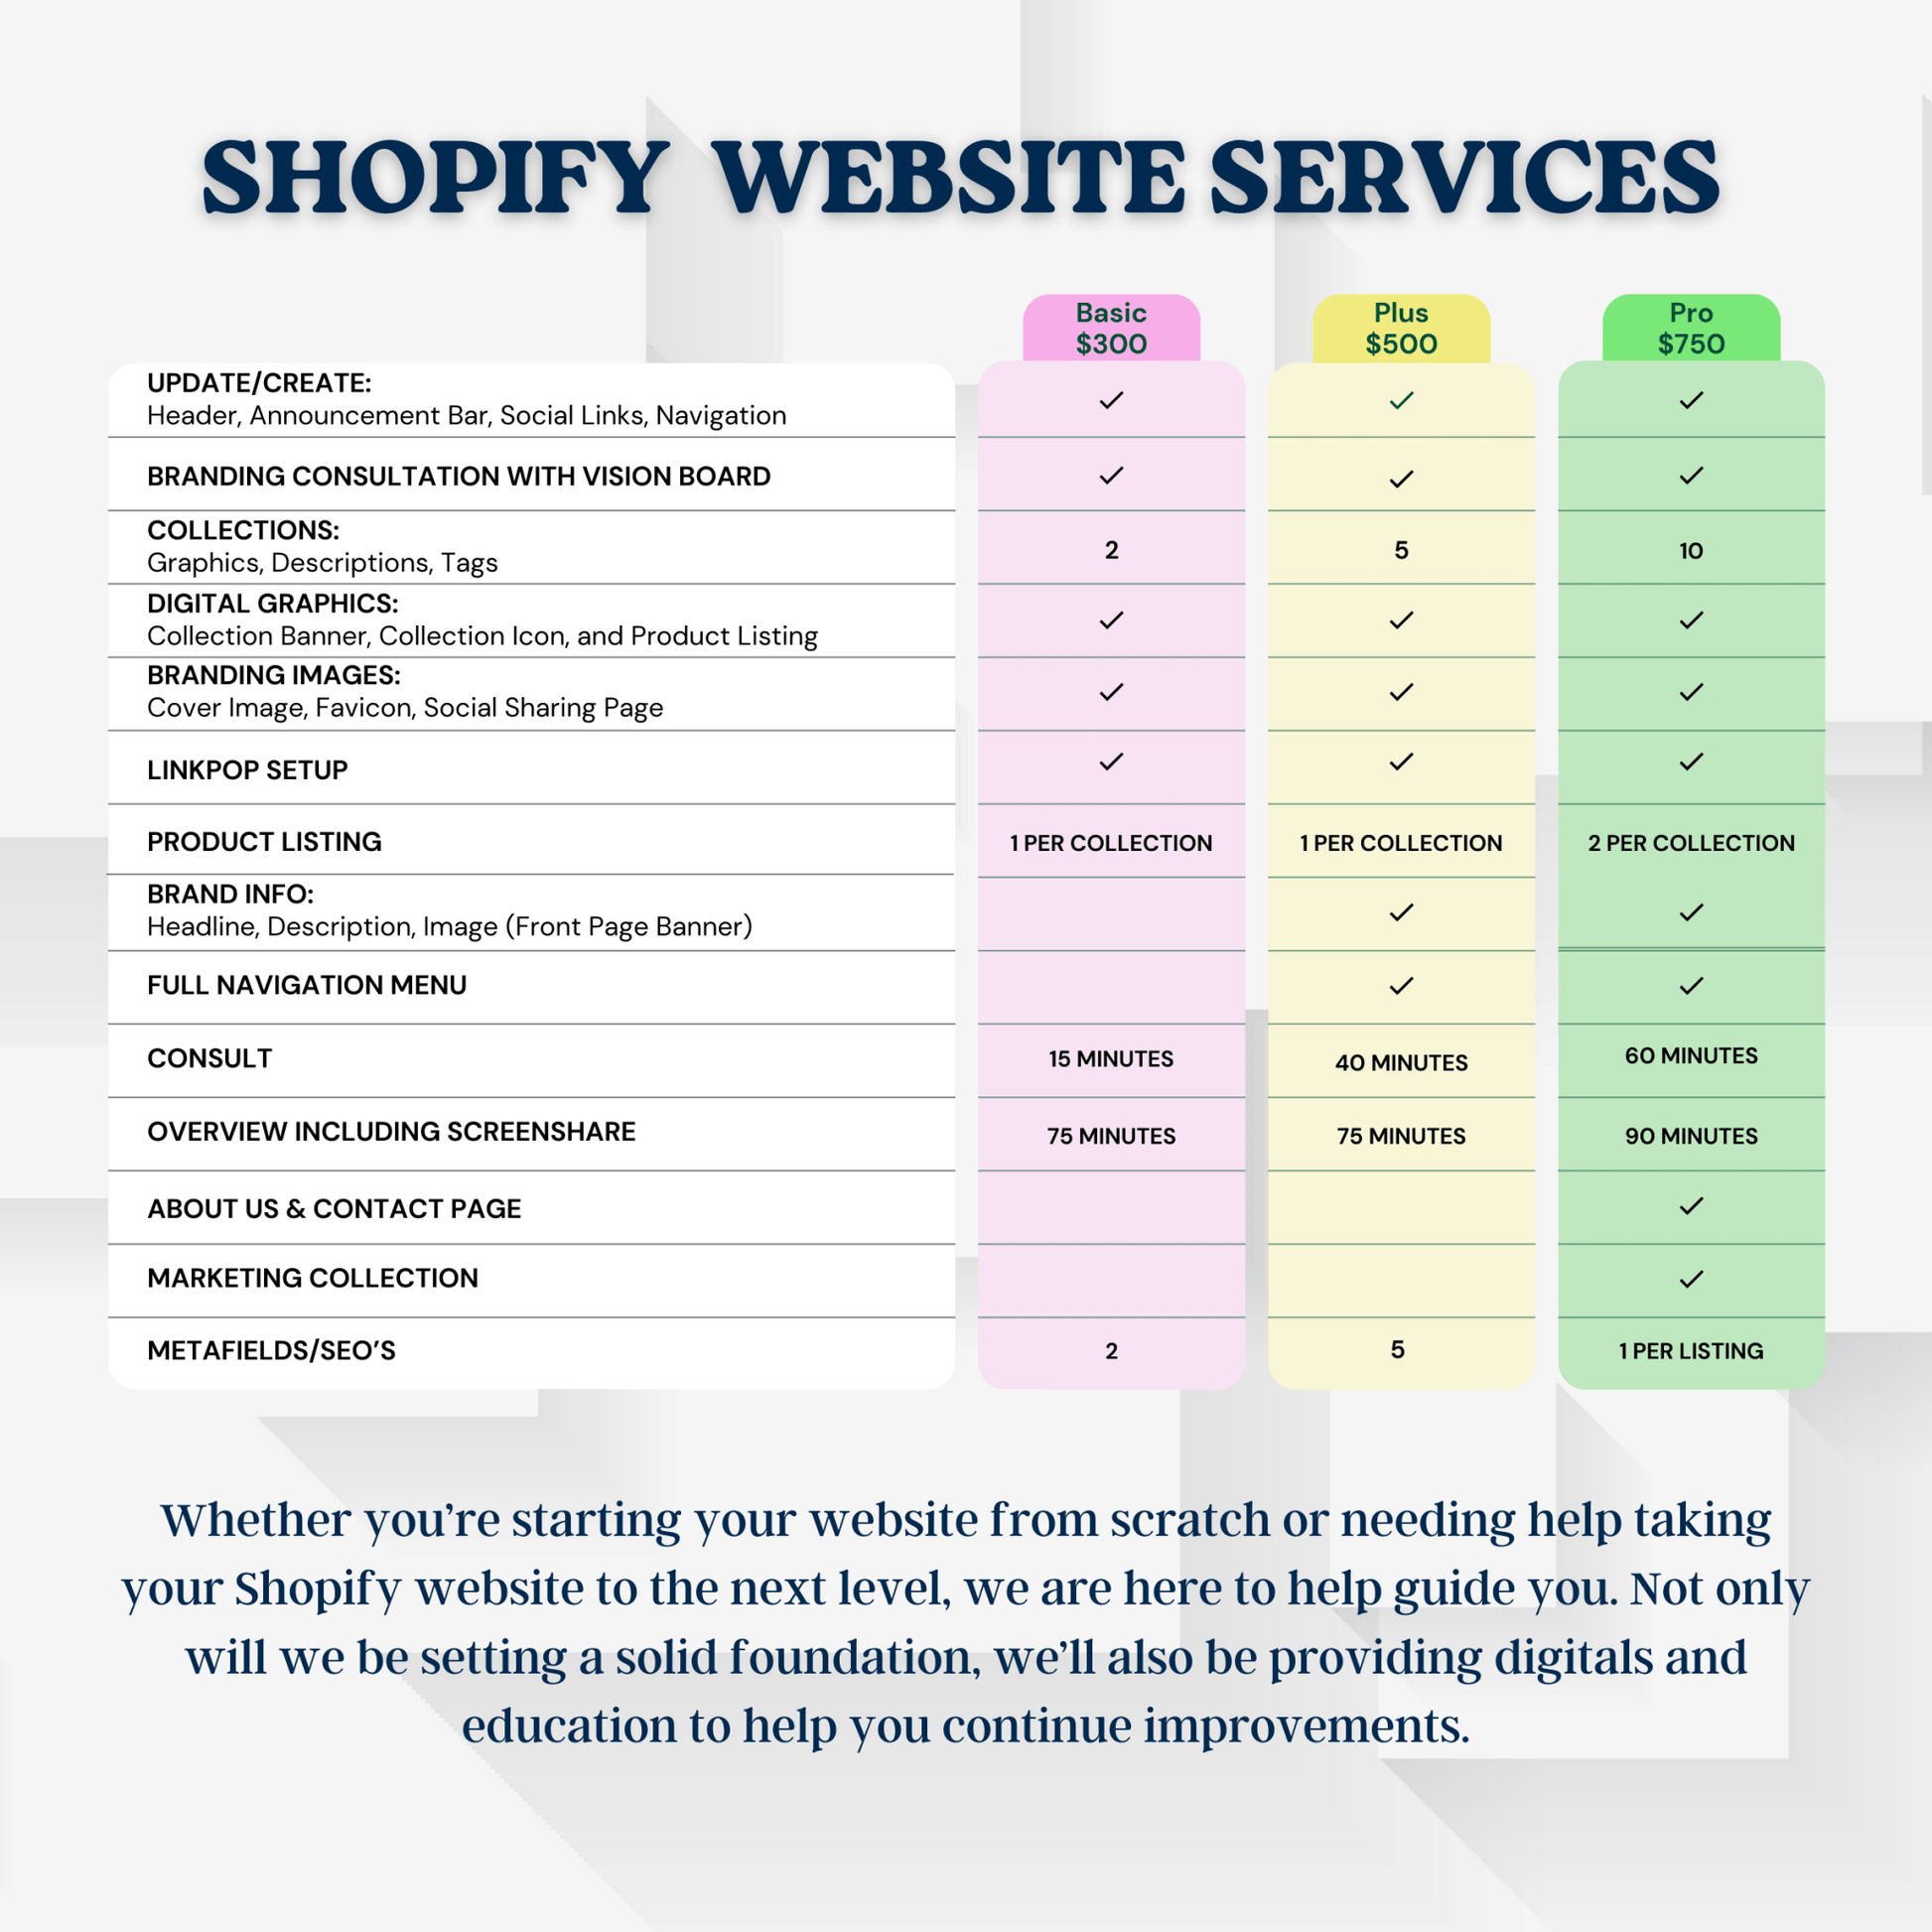 Website Development & Training for Shopify - SERVICES